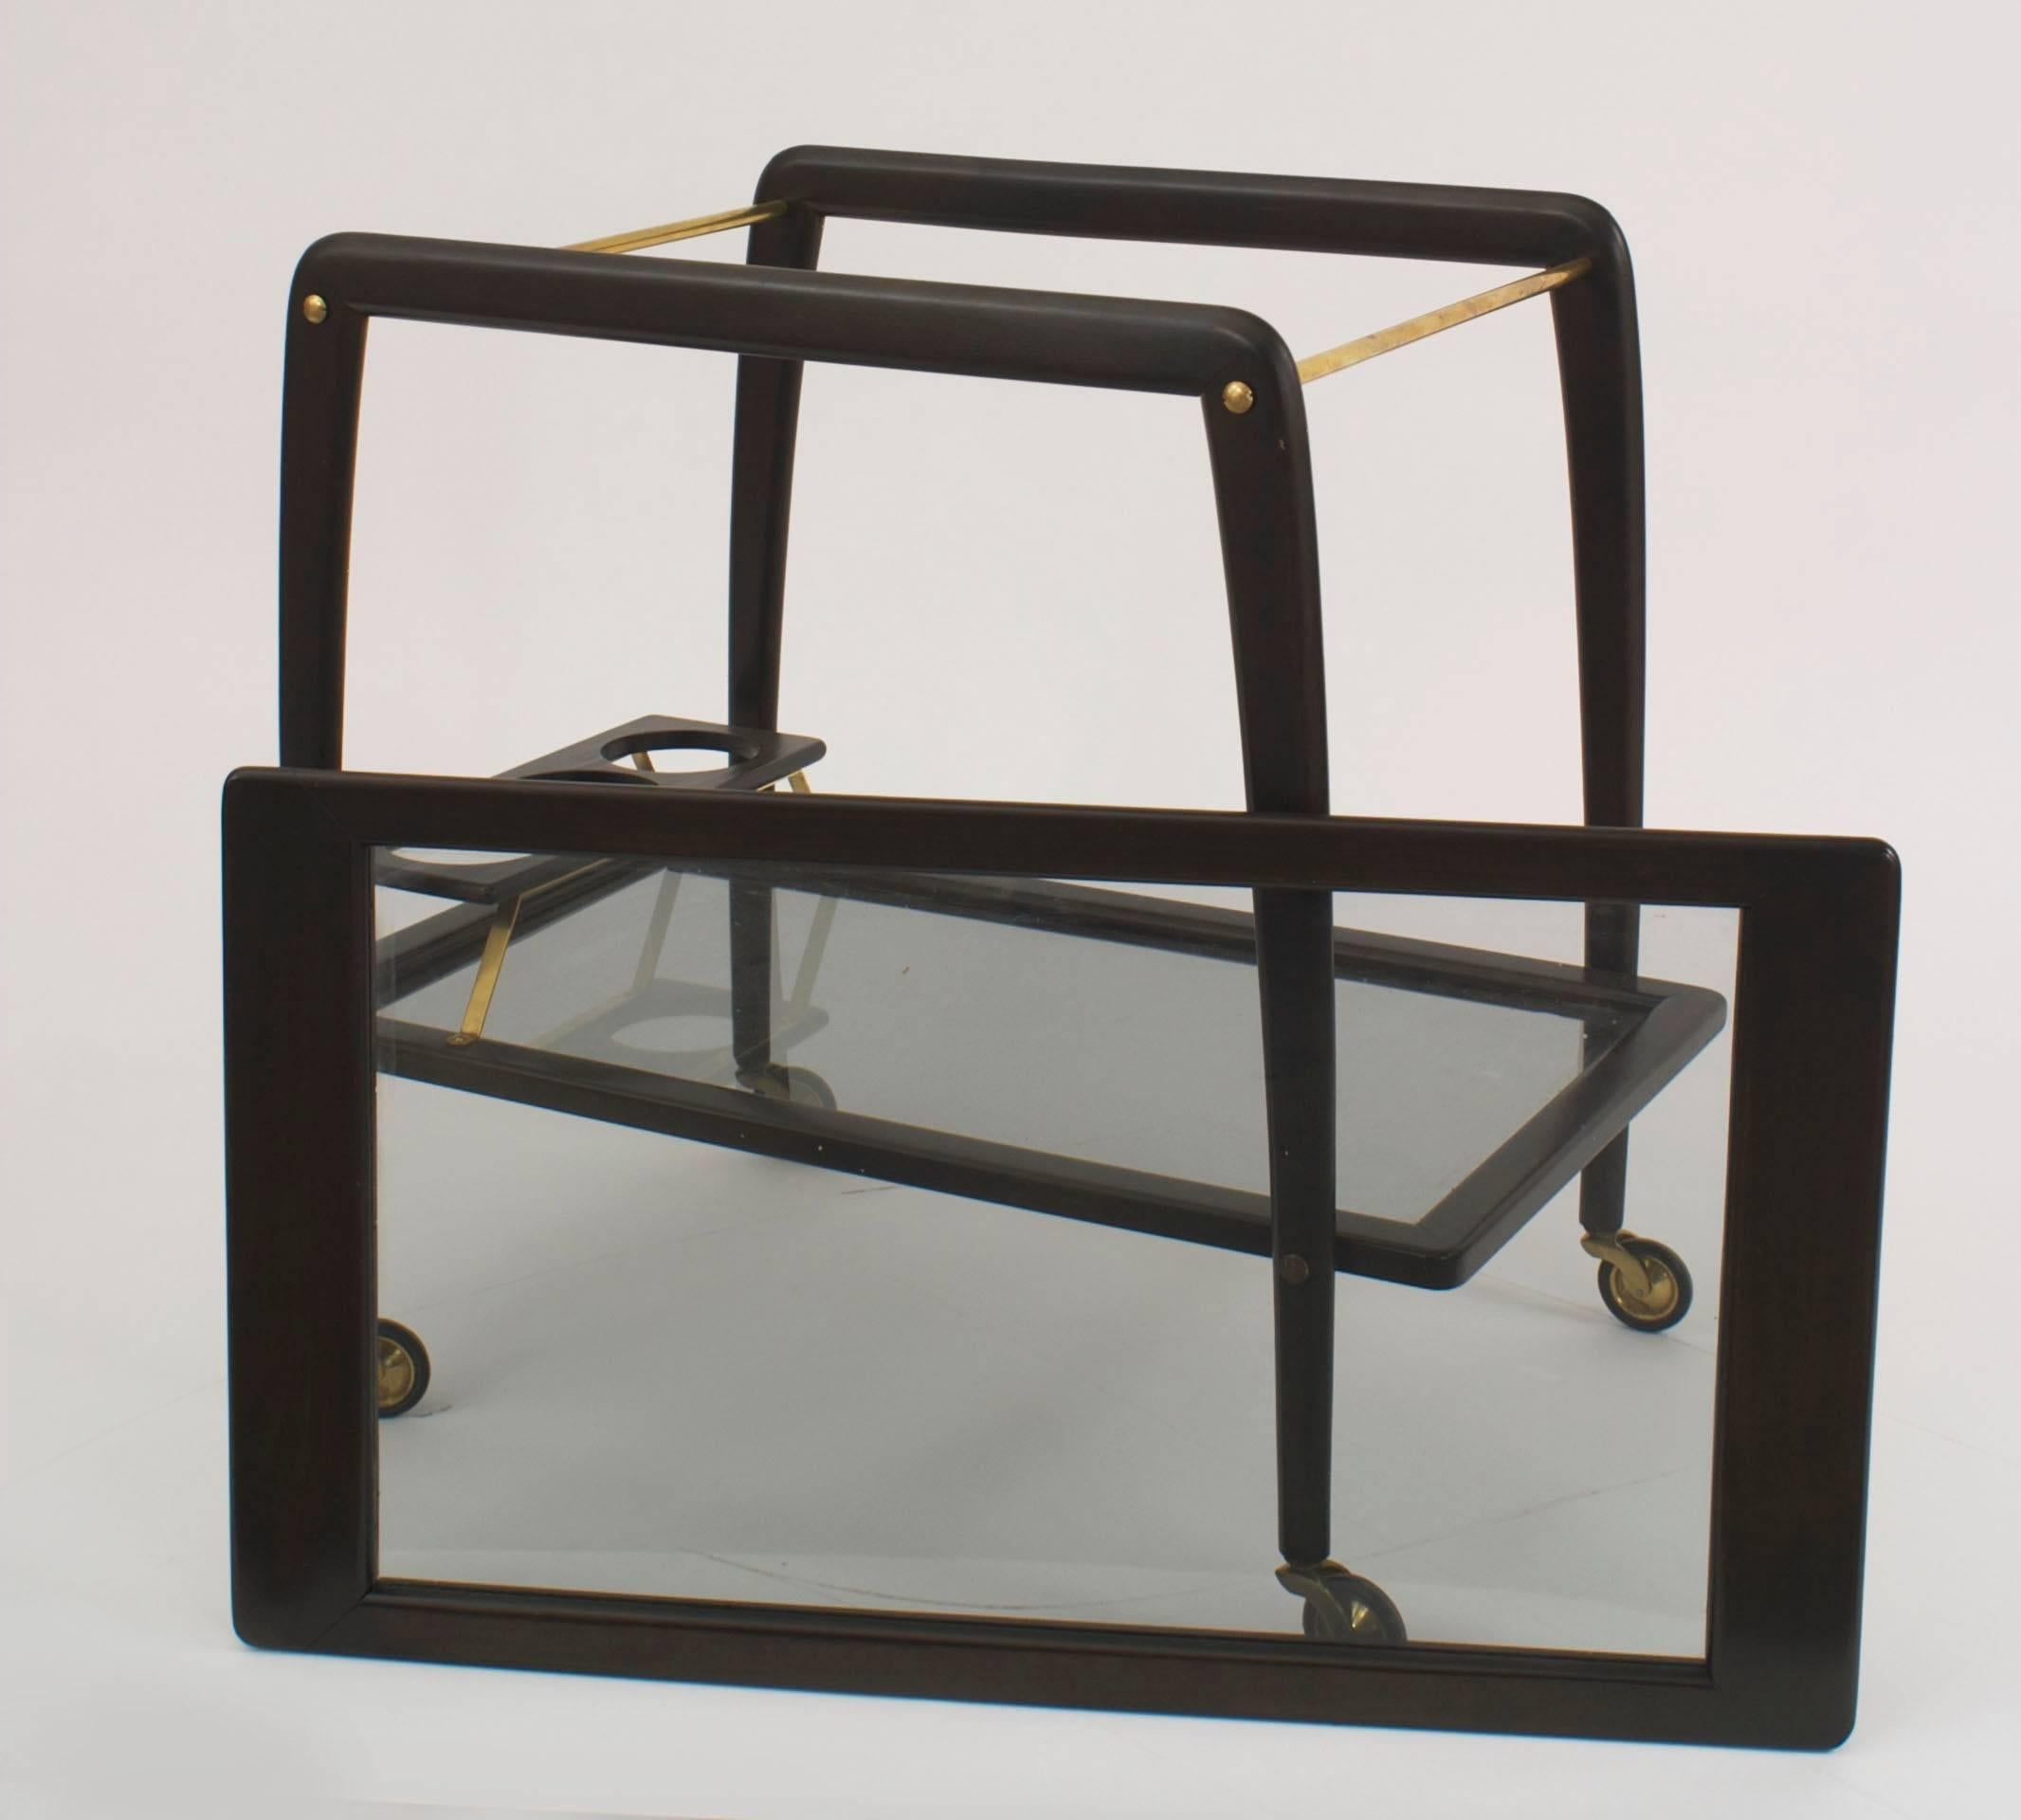 Italian Mid-Century (1950s) dark walnut liquor or drinks trolley bar cart on brass wheels having a removable glass tray top and bottom shelf with three bottle holders (by Ico Parisi, Cesare Lacca for Cassina).